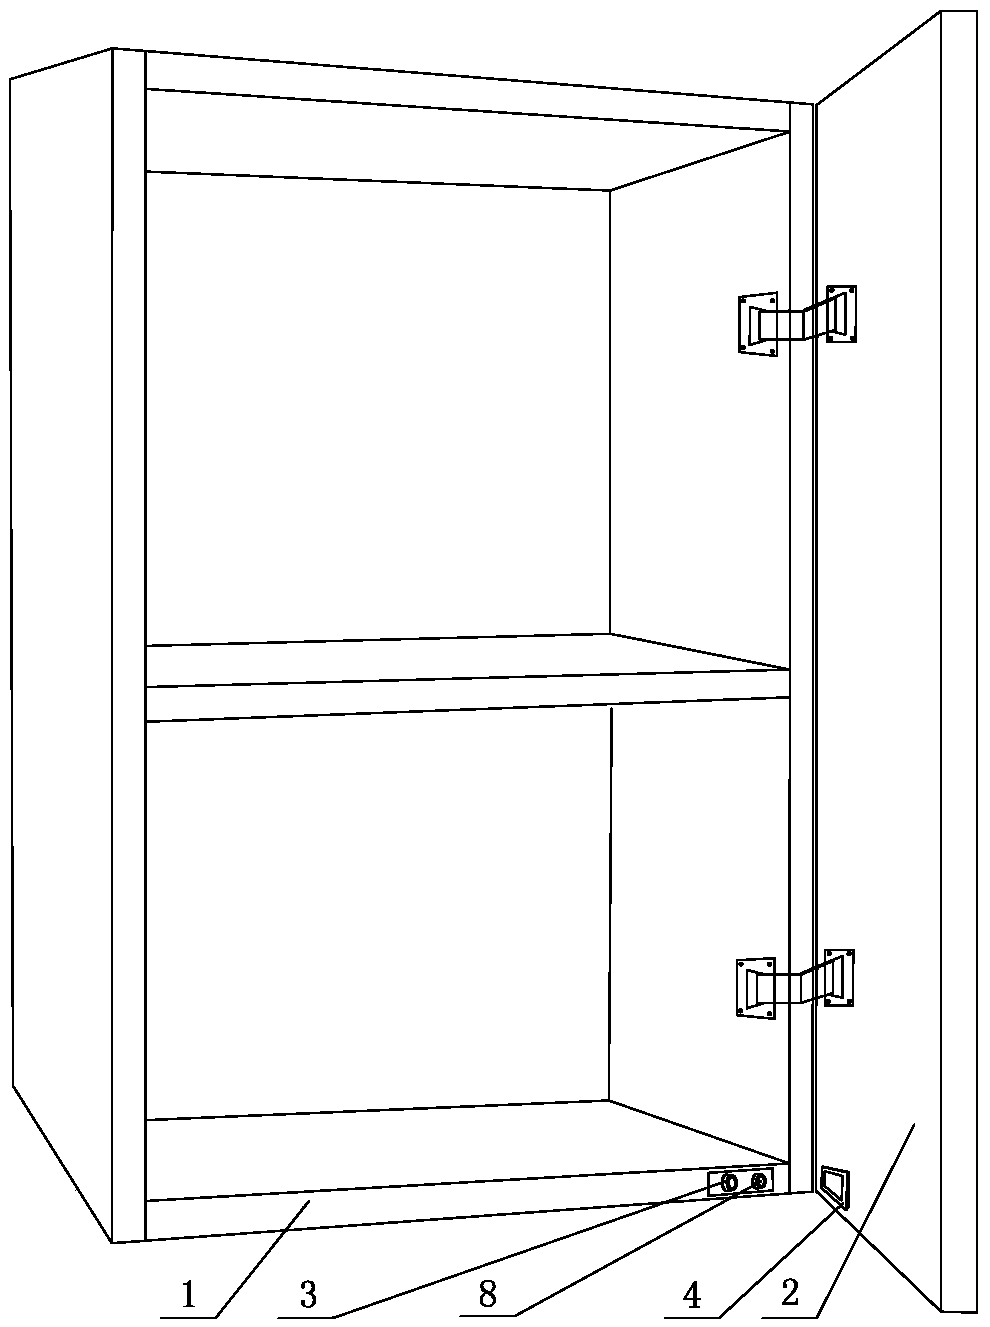 A- door panel power connection switch device